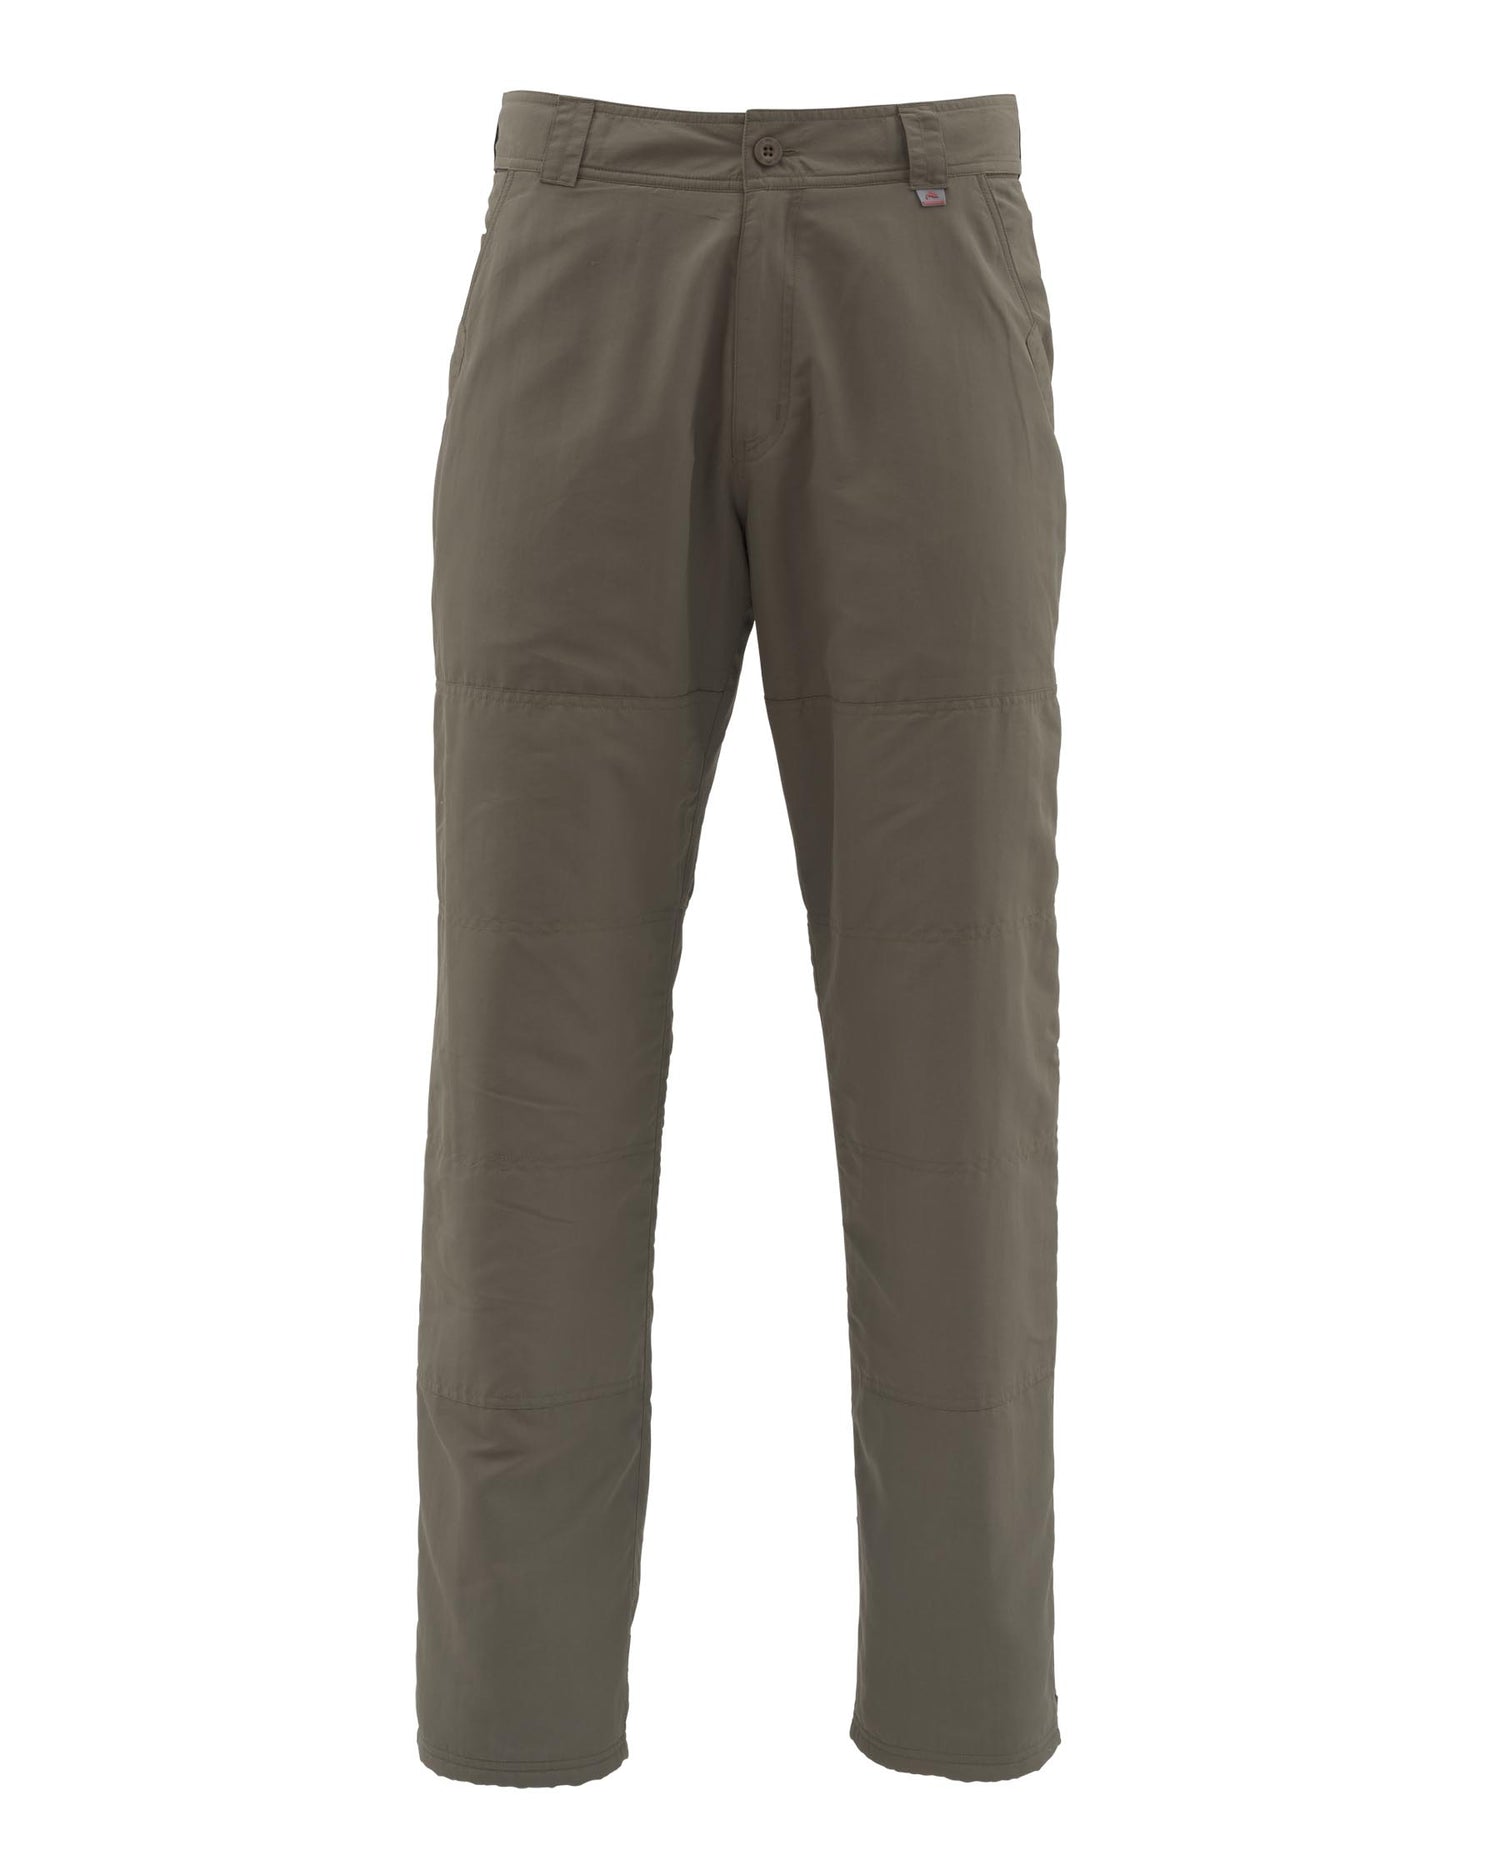 M's ColdWeather Pants  Simms Fishing Products